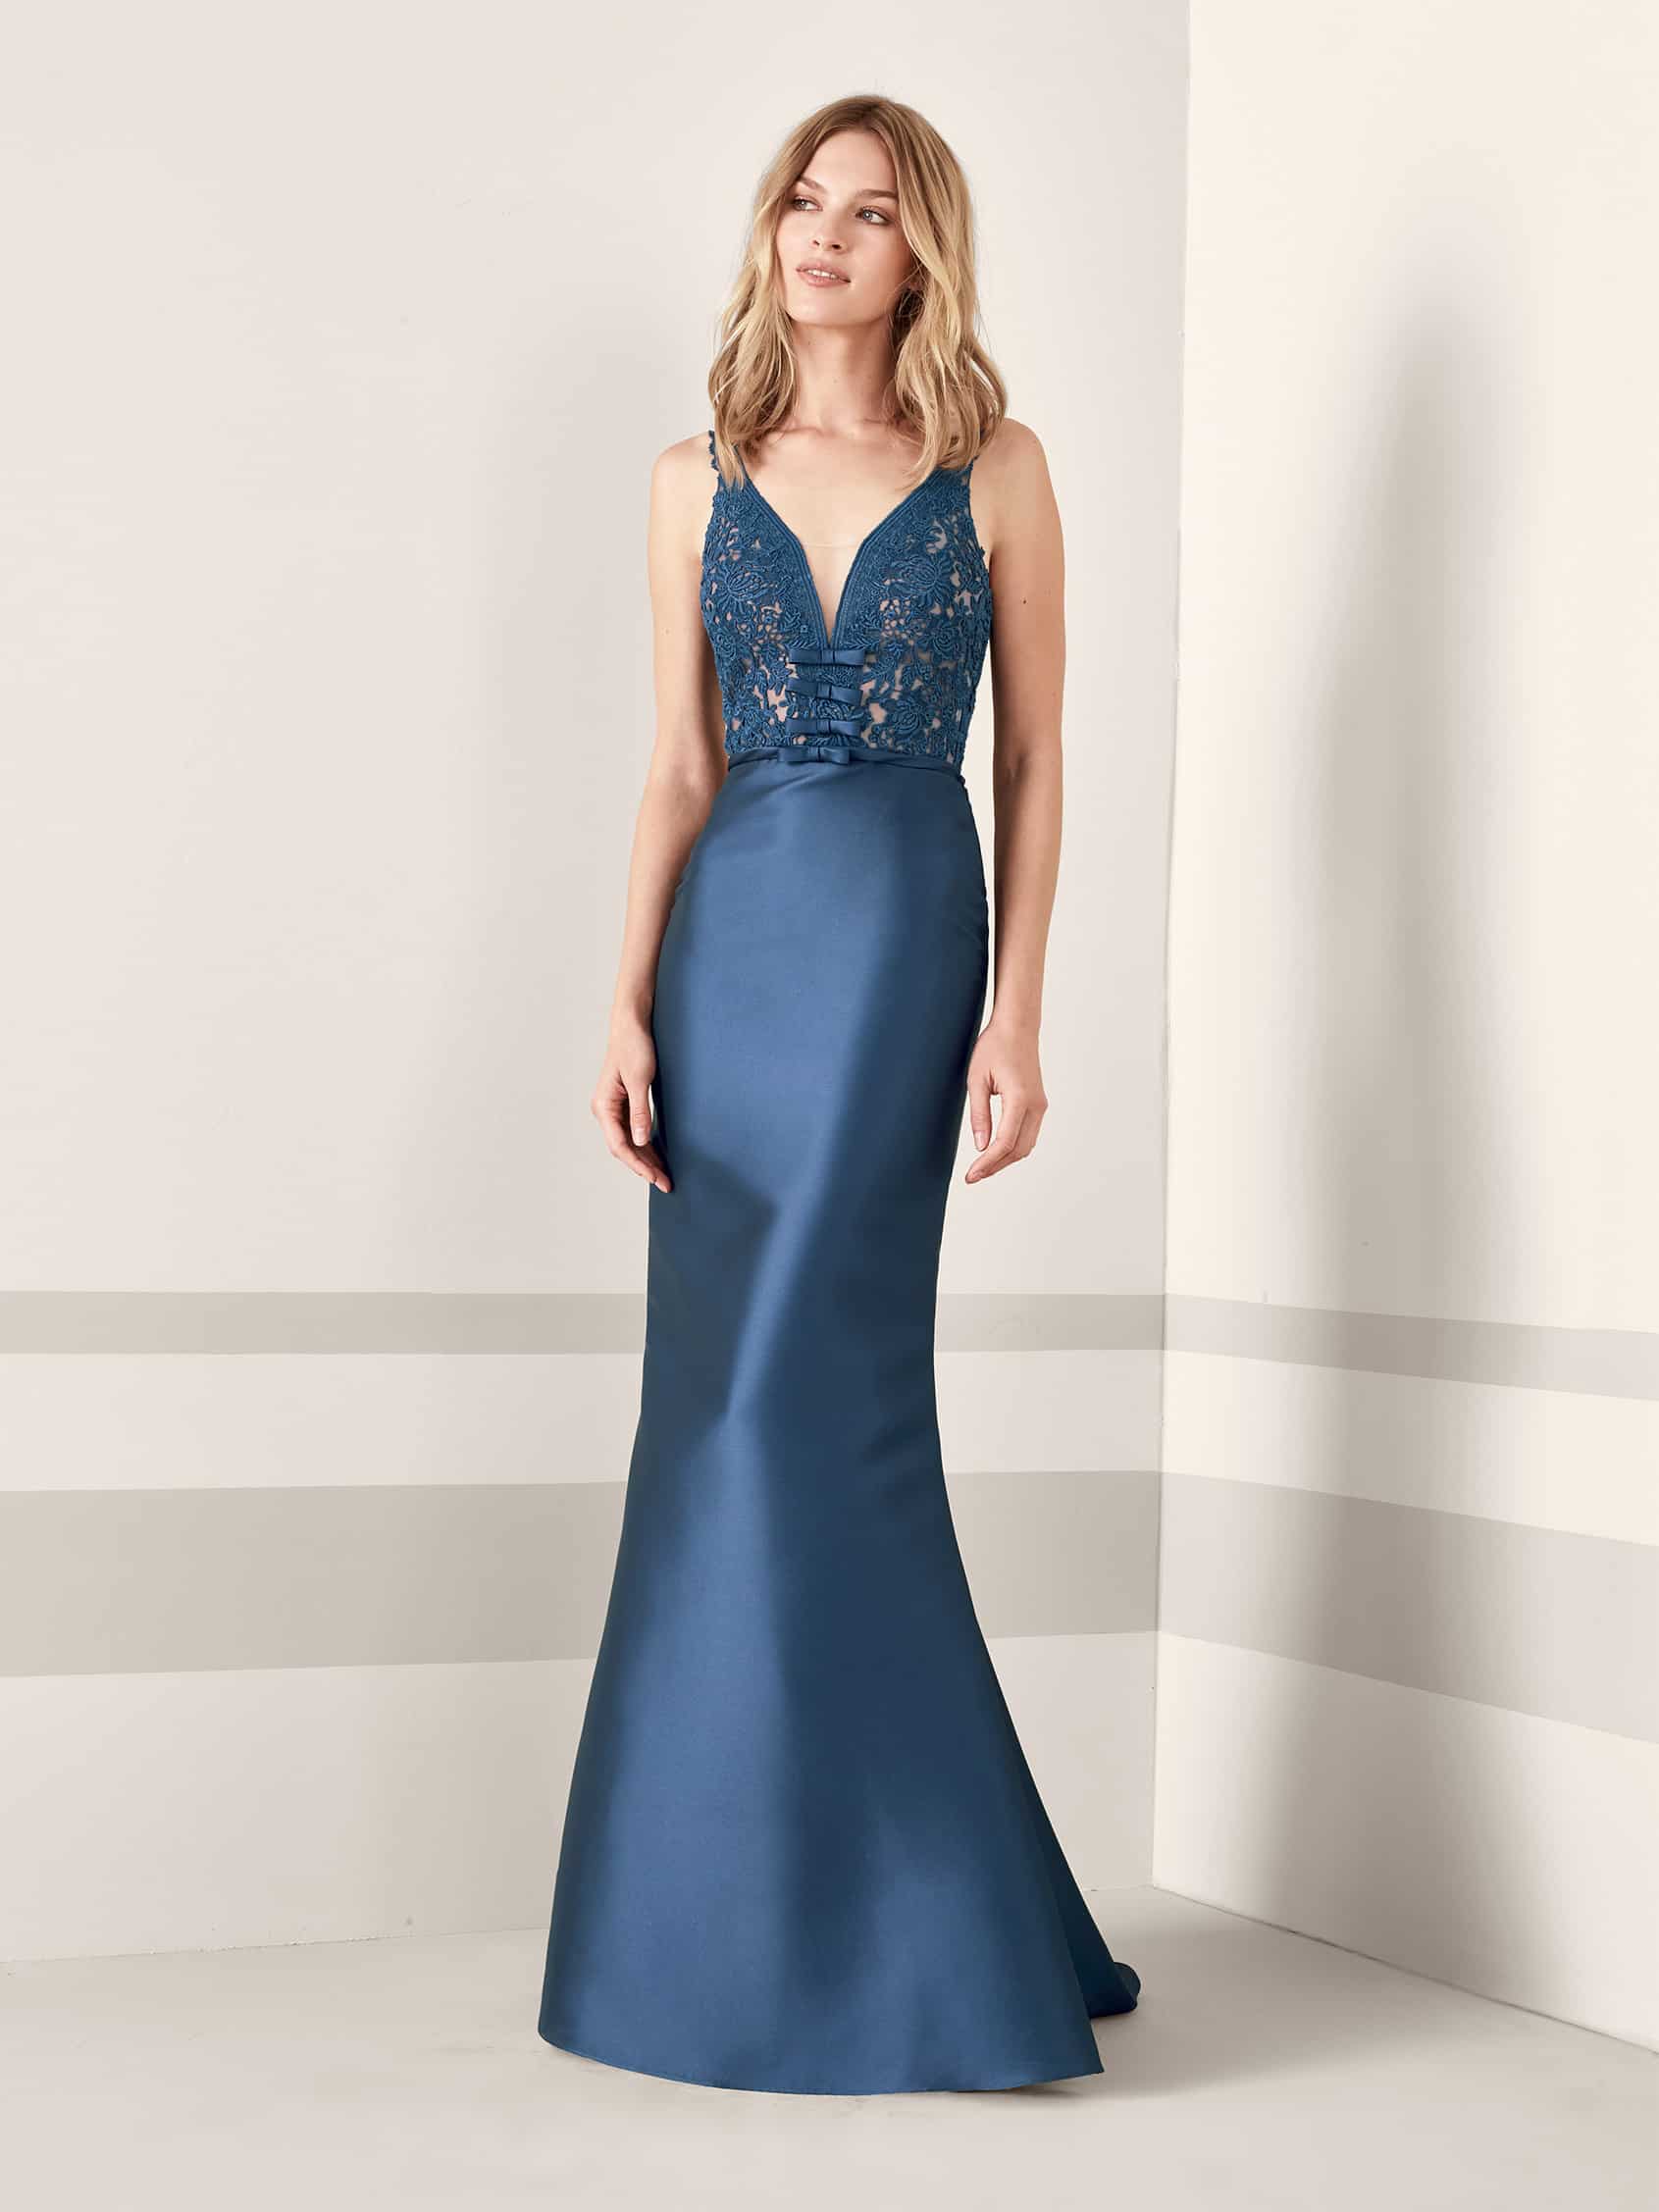 Embroidered Mikado Mermaid Gown with Open Back.JPG